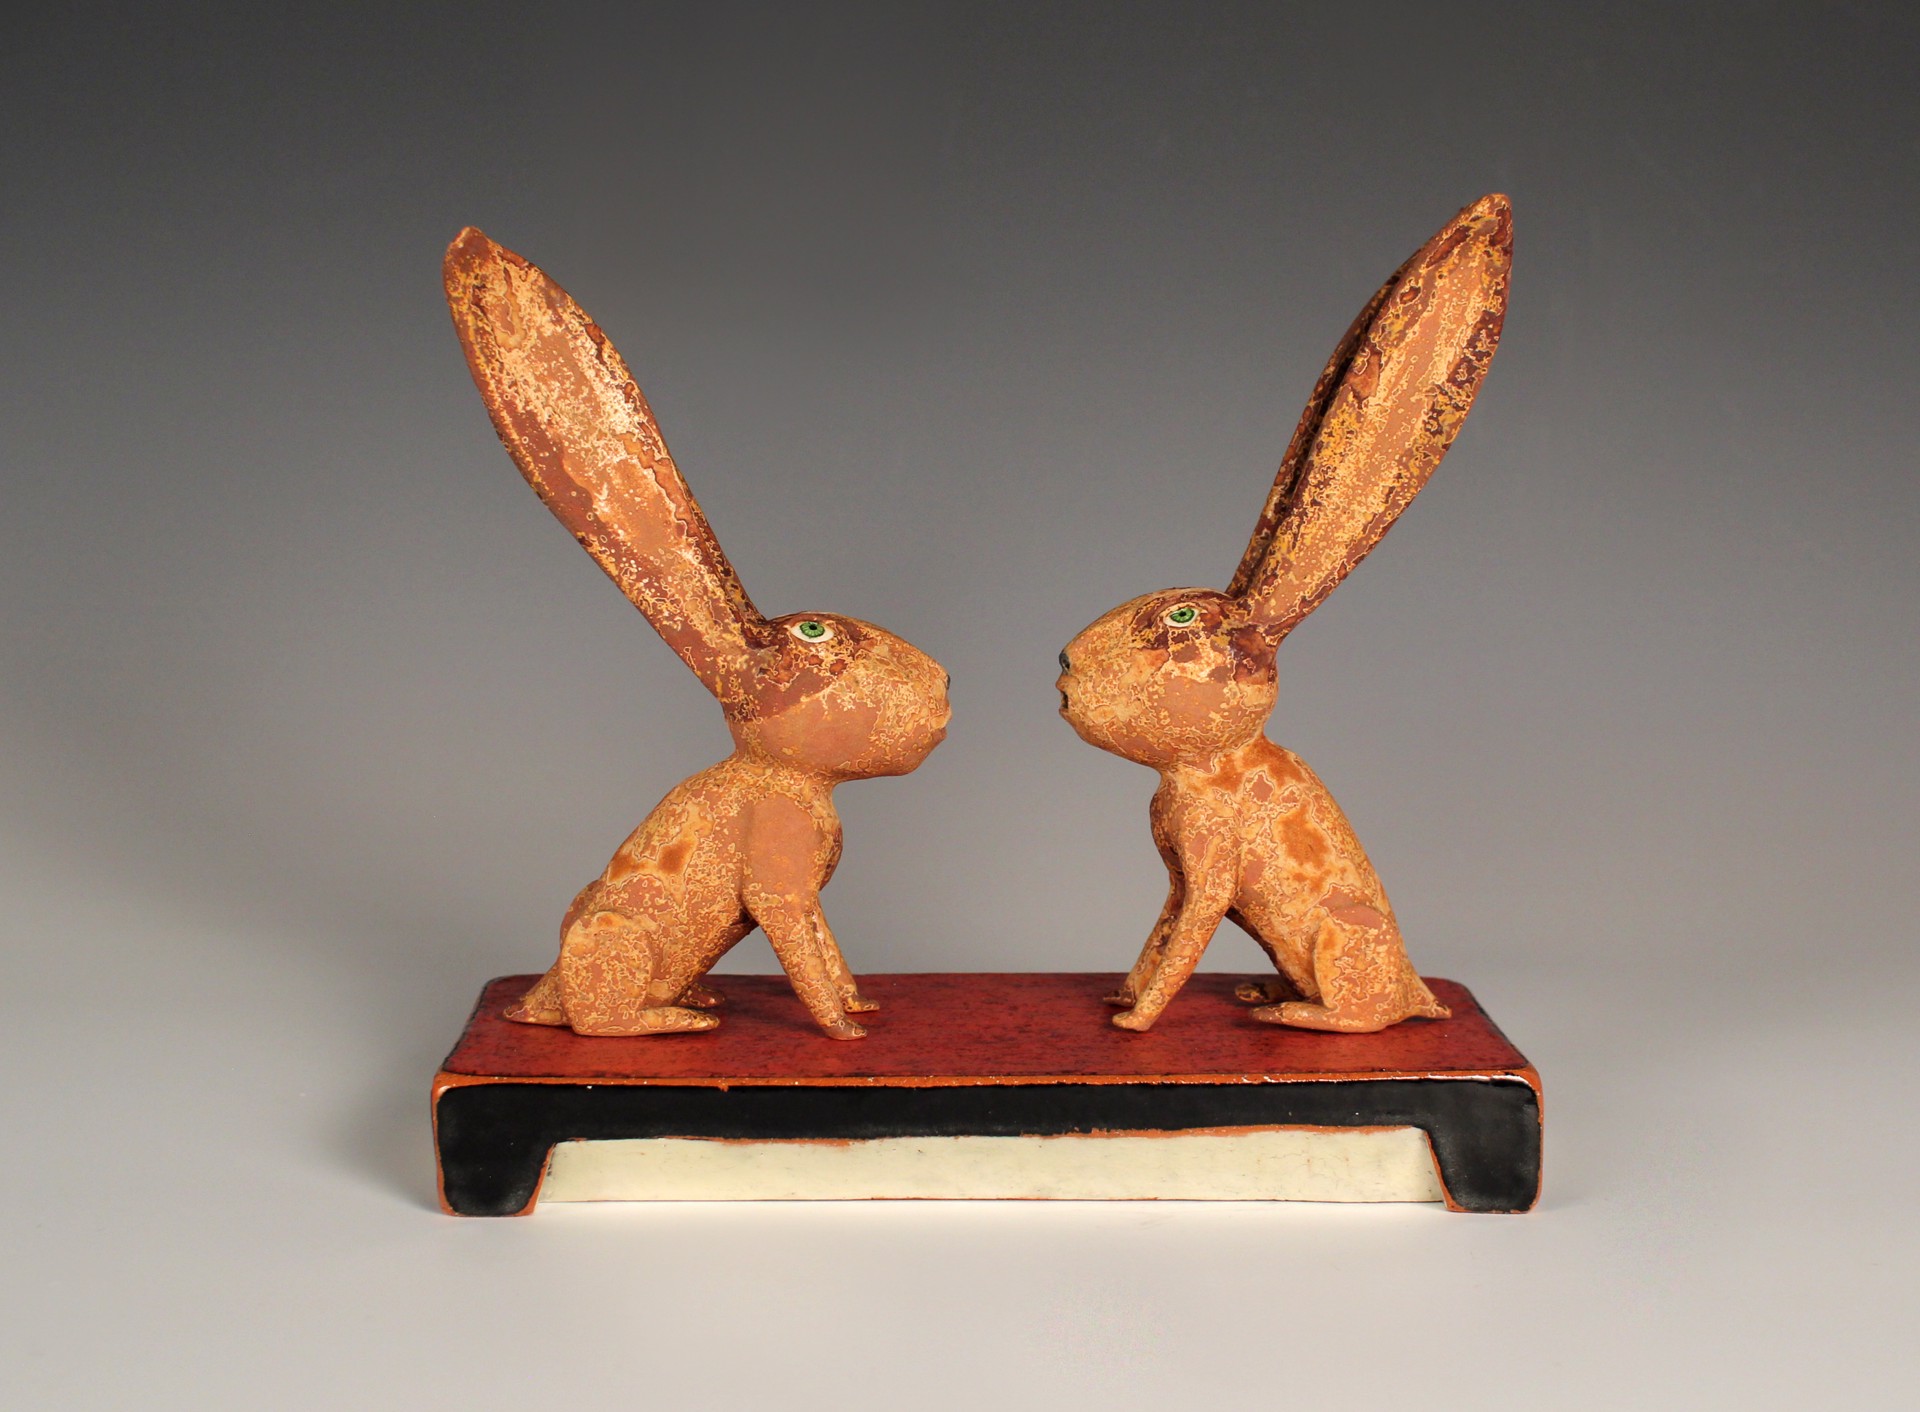 Two Rabbits Probably Discussing Something by Wesley Anderegg